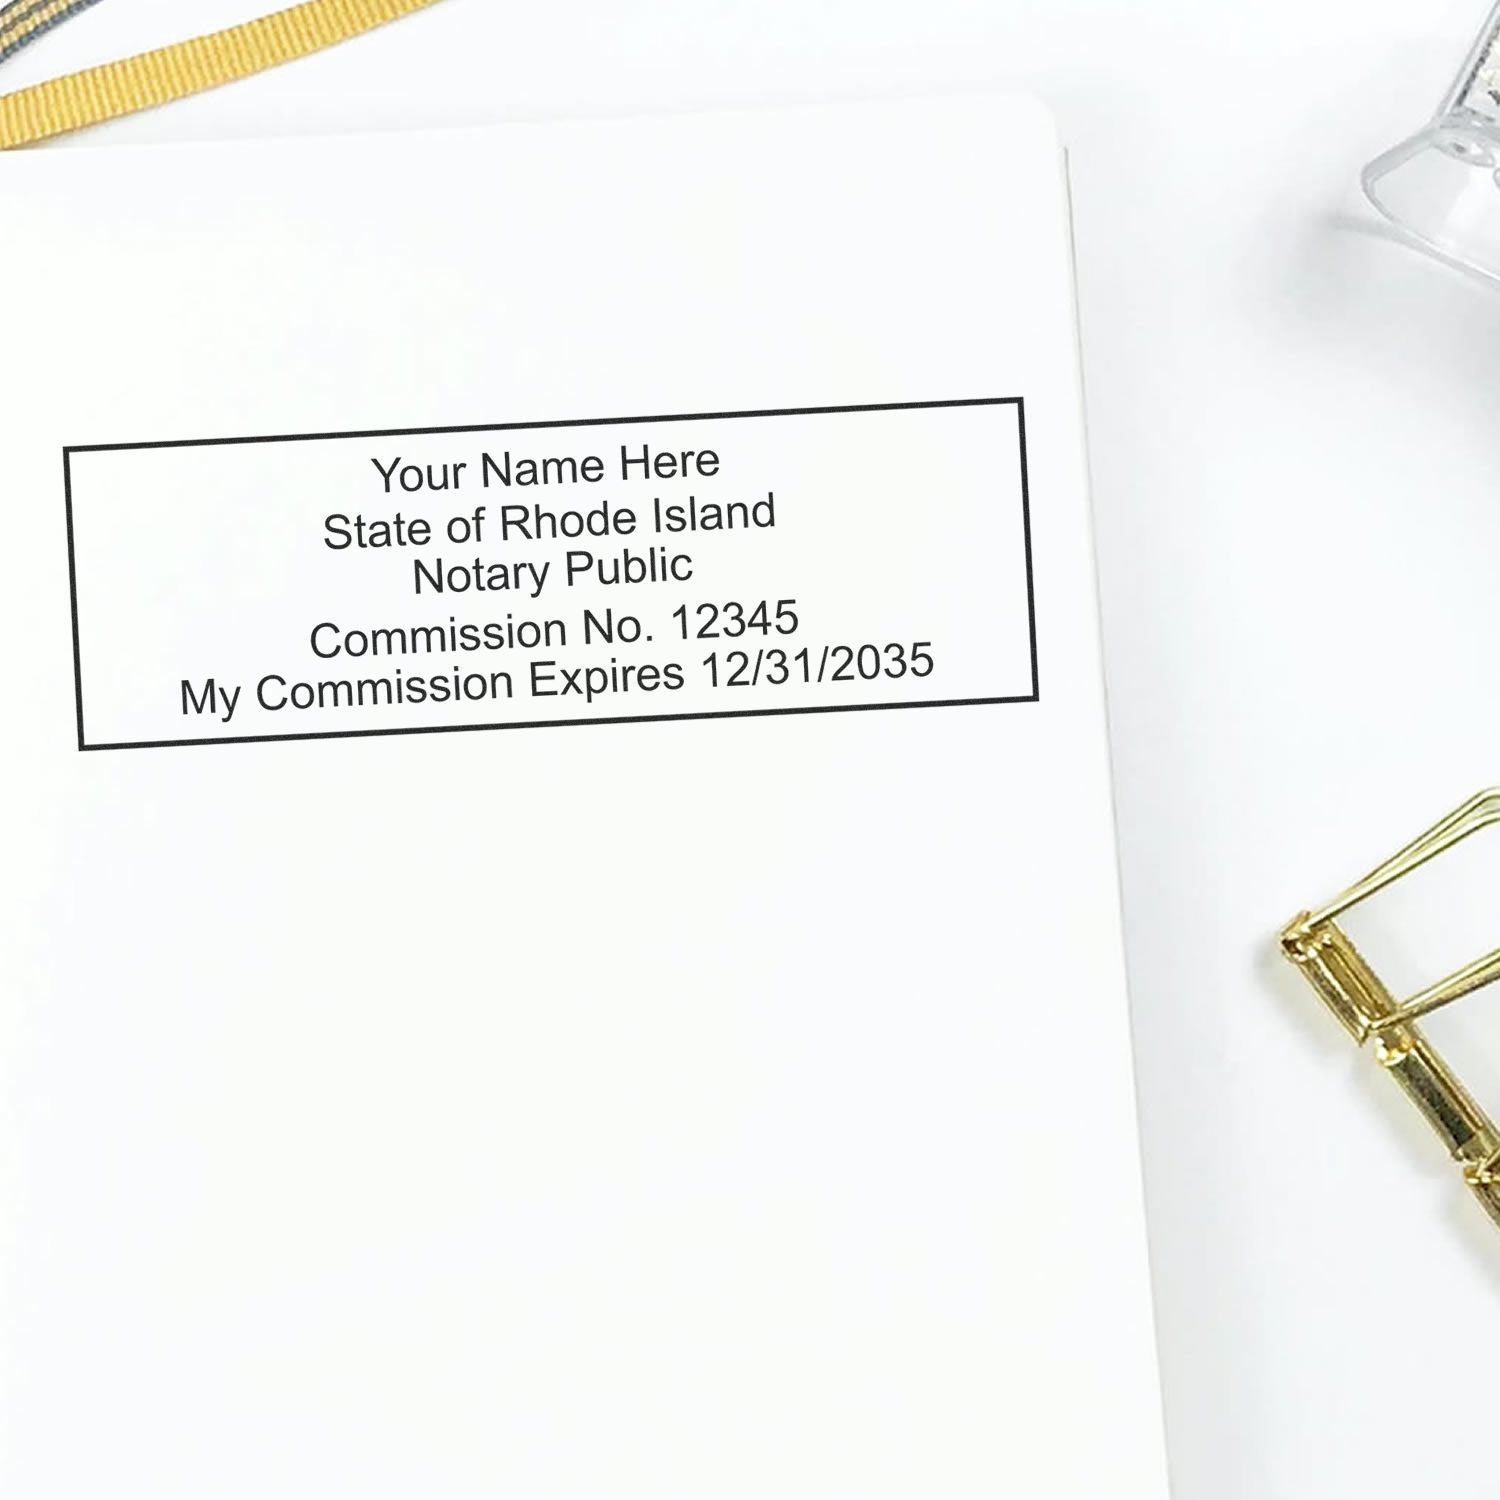 The main image for the Heavy-Duty Rhode Island Rectangular Notary Stamp depicting a sample of the imprint and electronic files